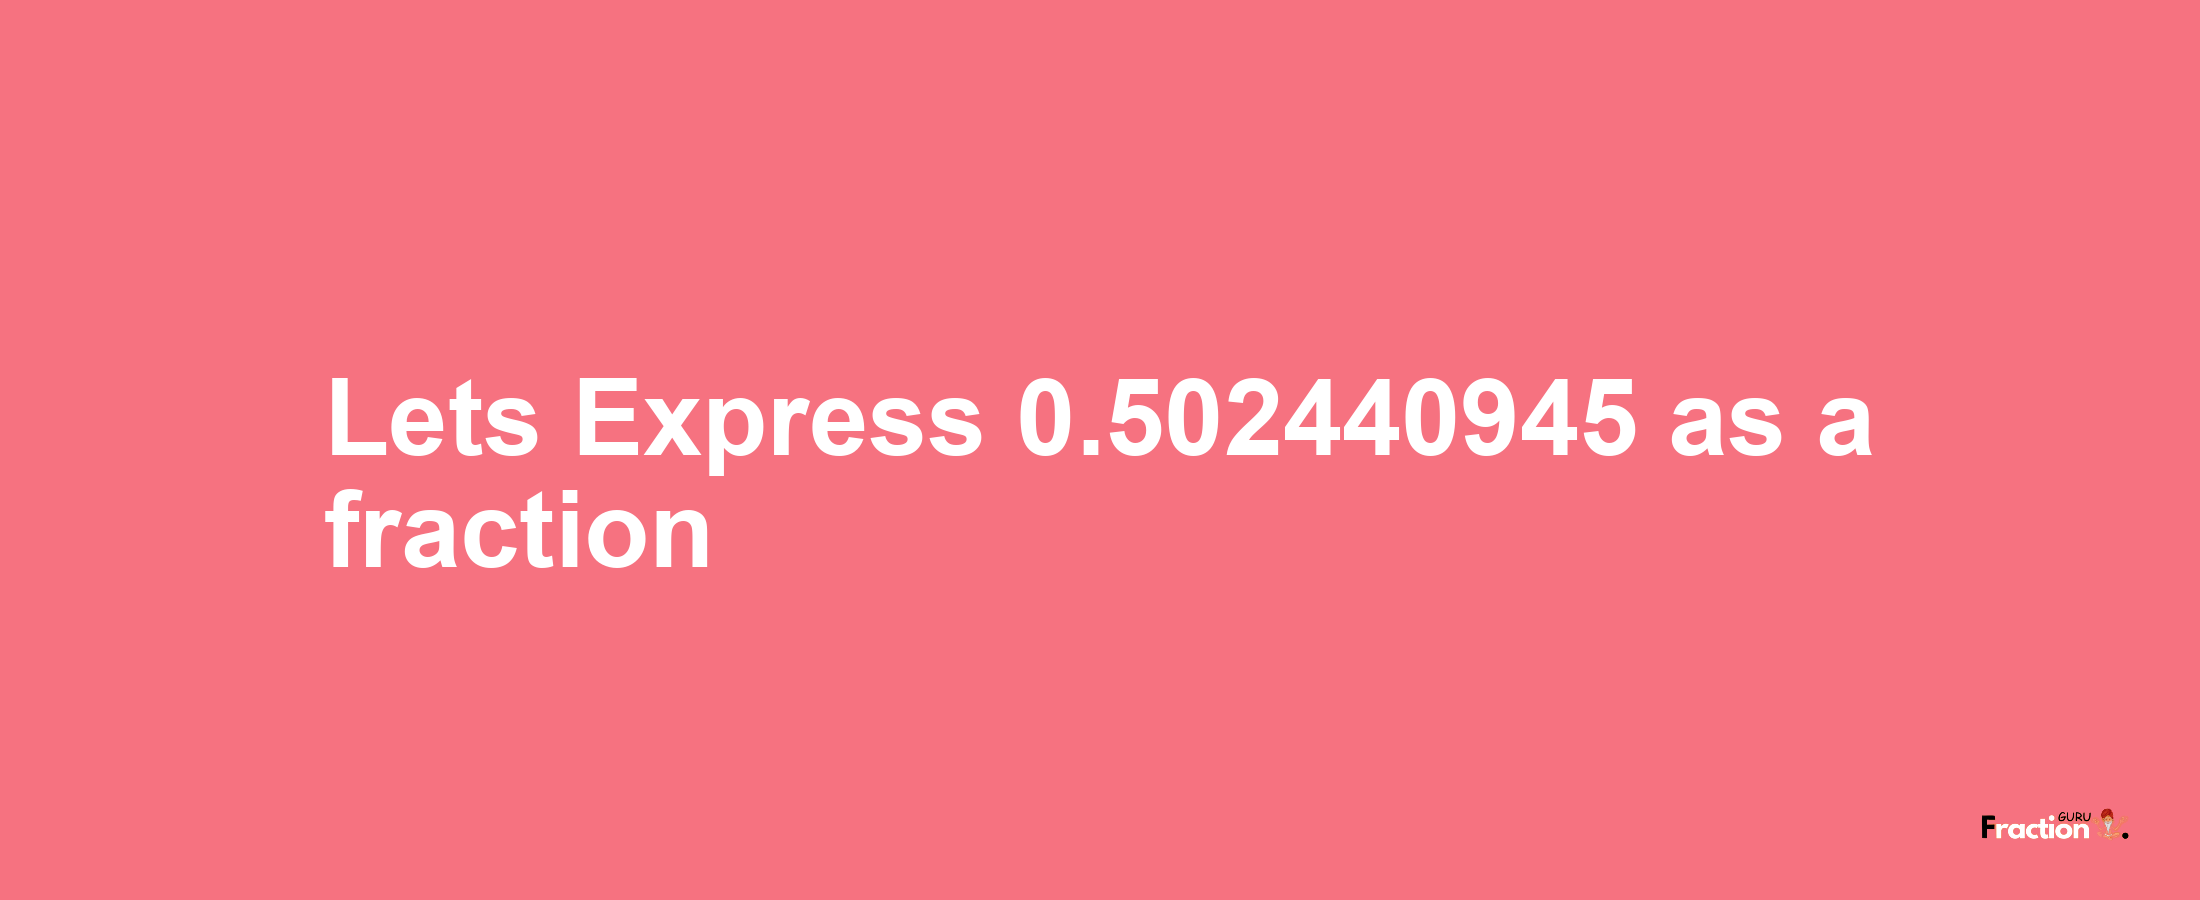 Lets Express 0.502440945 as afraction